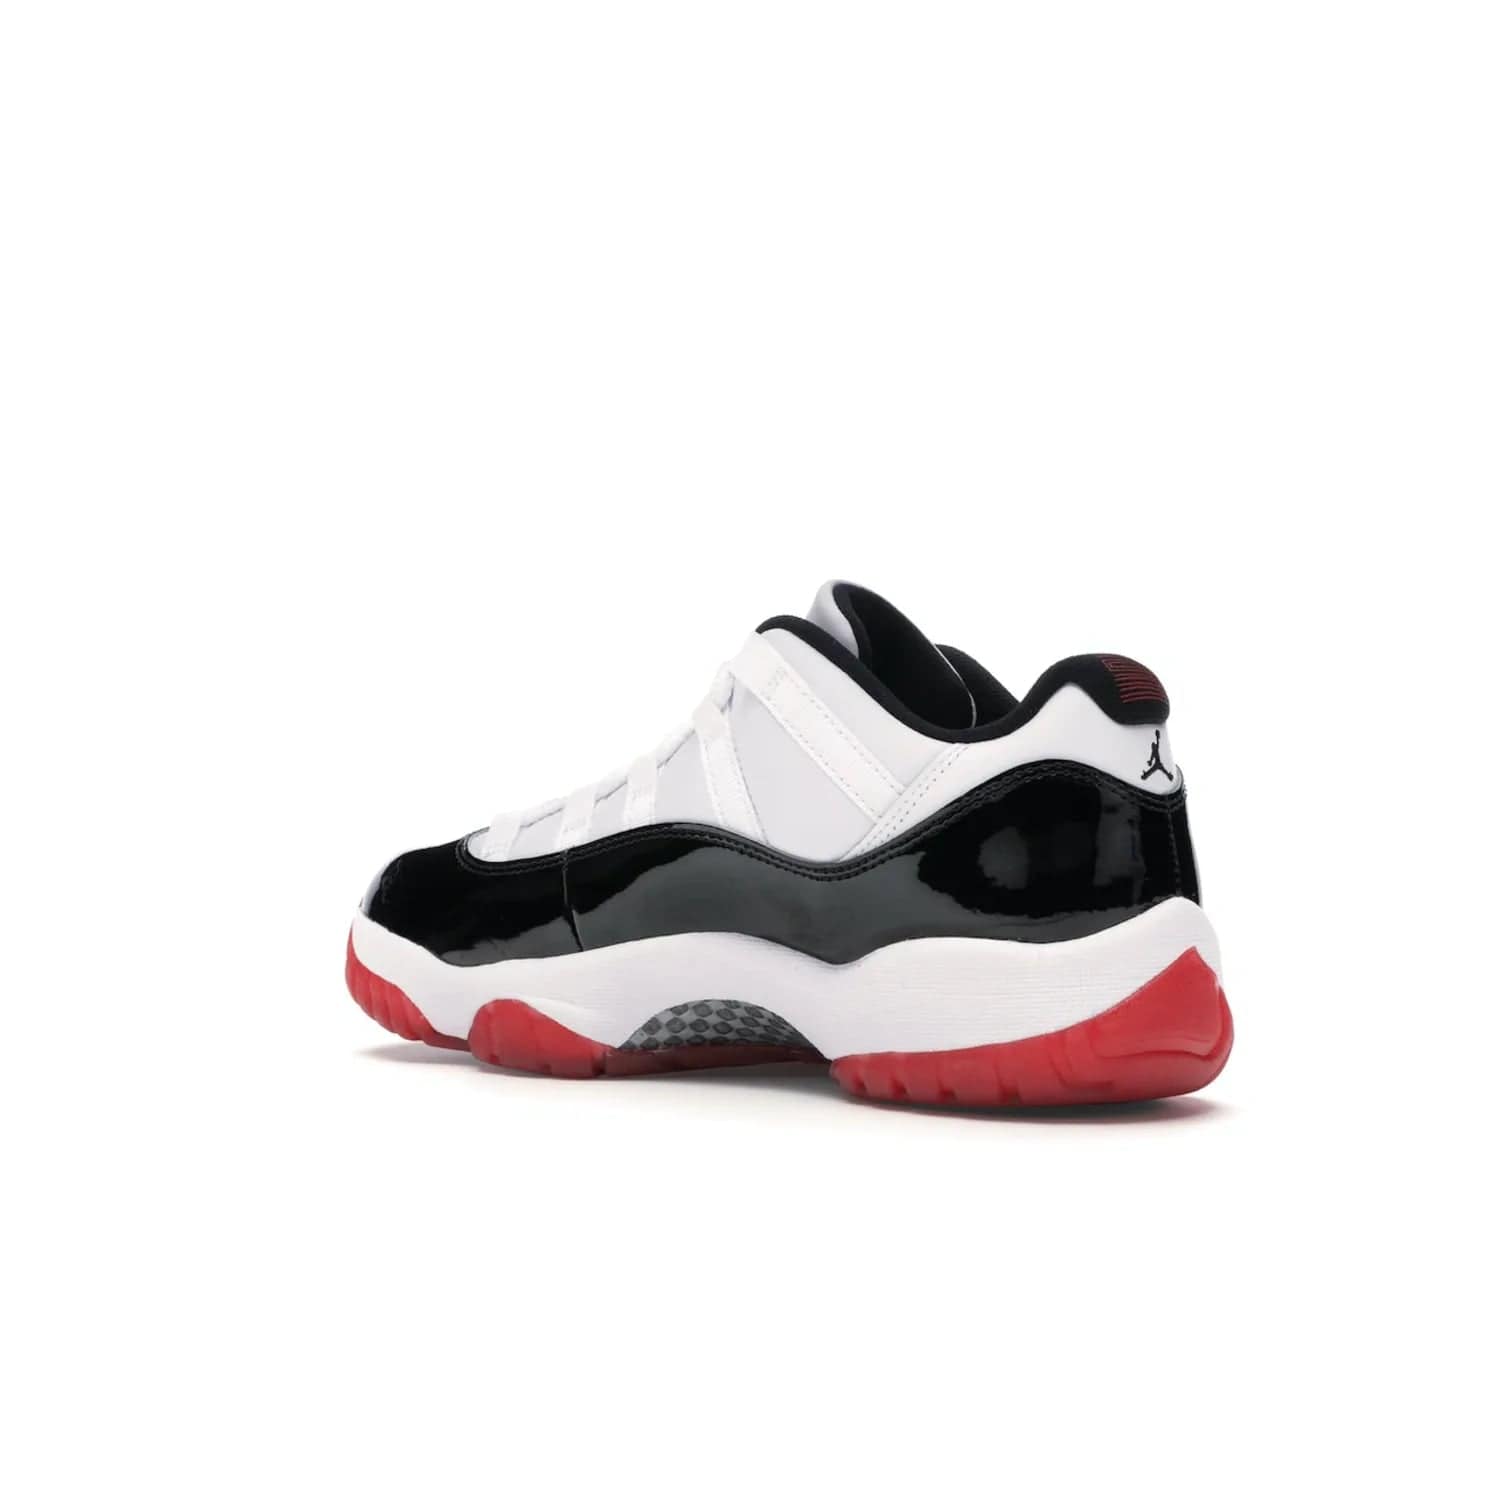 Jordan 11 Retro Low Concord Bred - Image 23 - Only at www.BallersClubKickz.com - Grab the classic Jordan 11 look with the Jordan 11 Retro Low Concord Bred. With white and black elements and the iconic red outsole of the Jordan 11 Bred, you won't miss a beat. Released in June 2020, the perfect complement to any outfit.